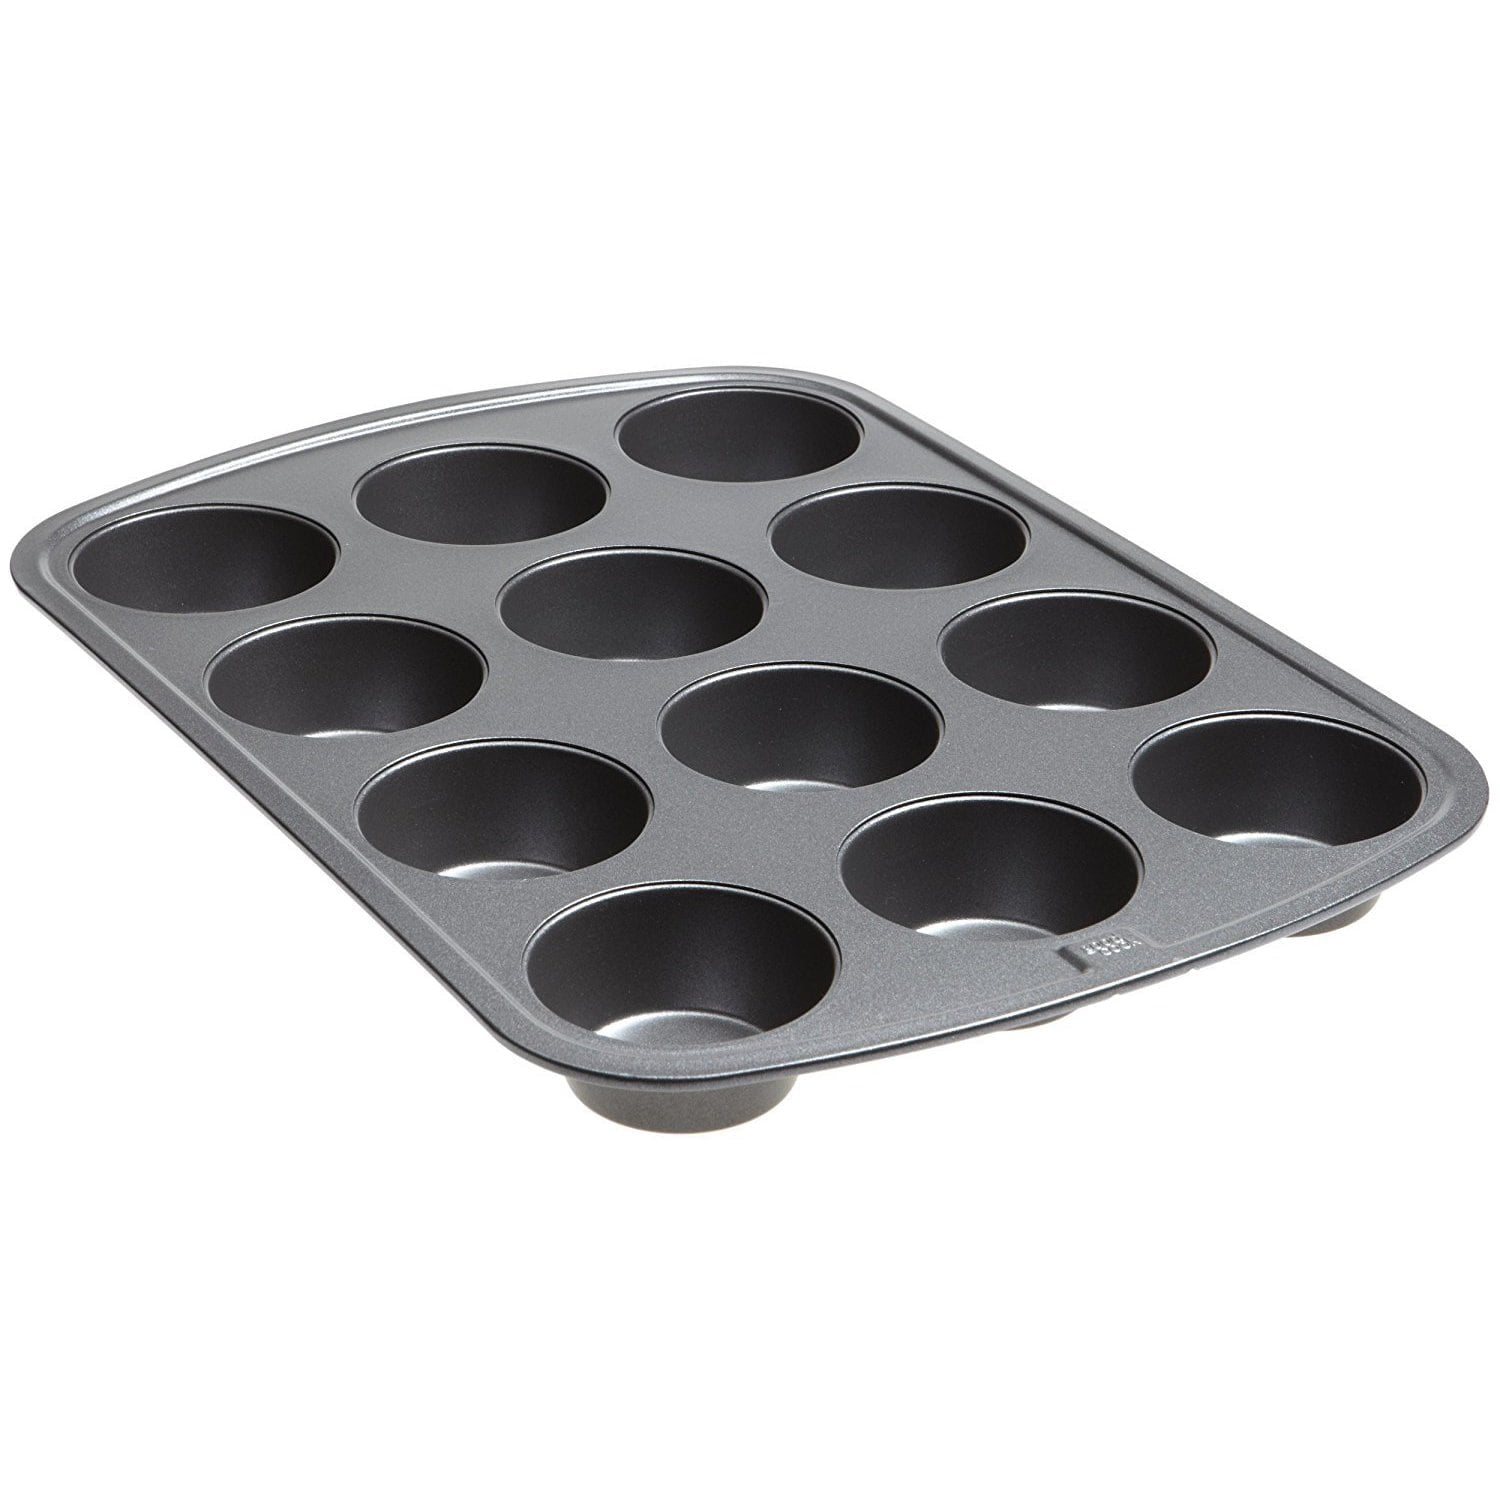 Premium Non-Stick Baking Pans Set of 4 - Includes Baking Sheet, 12 Cup Muffin Tin, Square Pan and Round Cake Pan - BPA Free, Heavy Duty, Made W